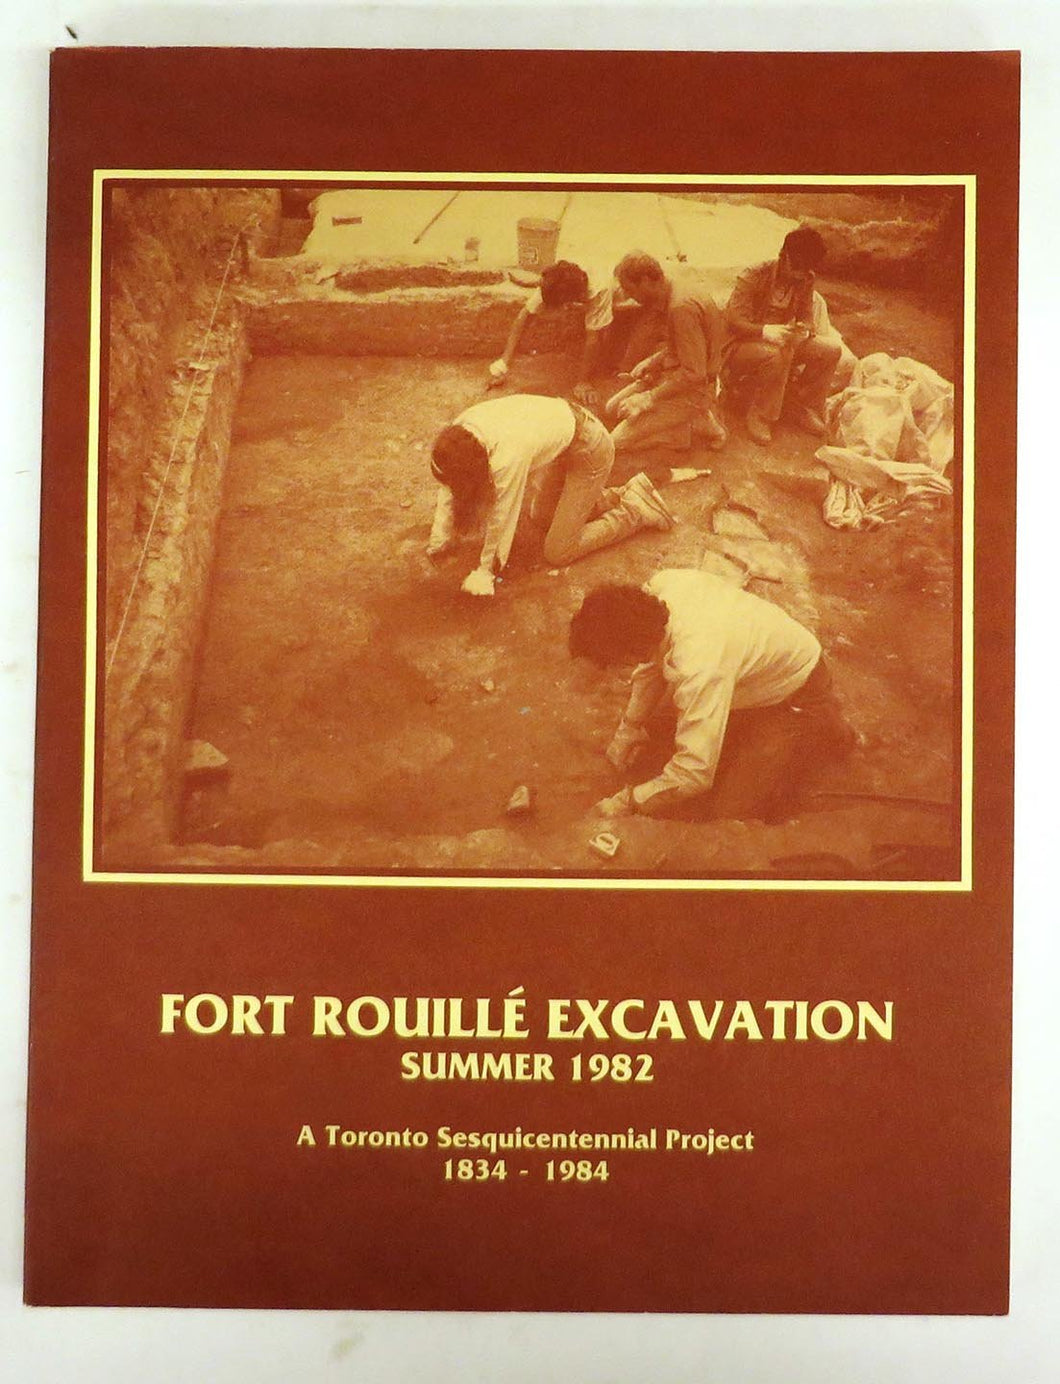 Fort Rouill Excavation Summer 1982: A Toronto Sesquicentennial Project 1834-1984